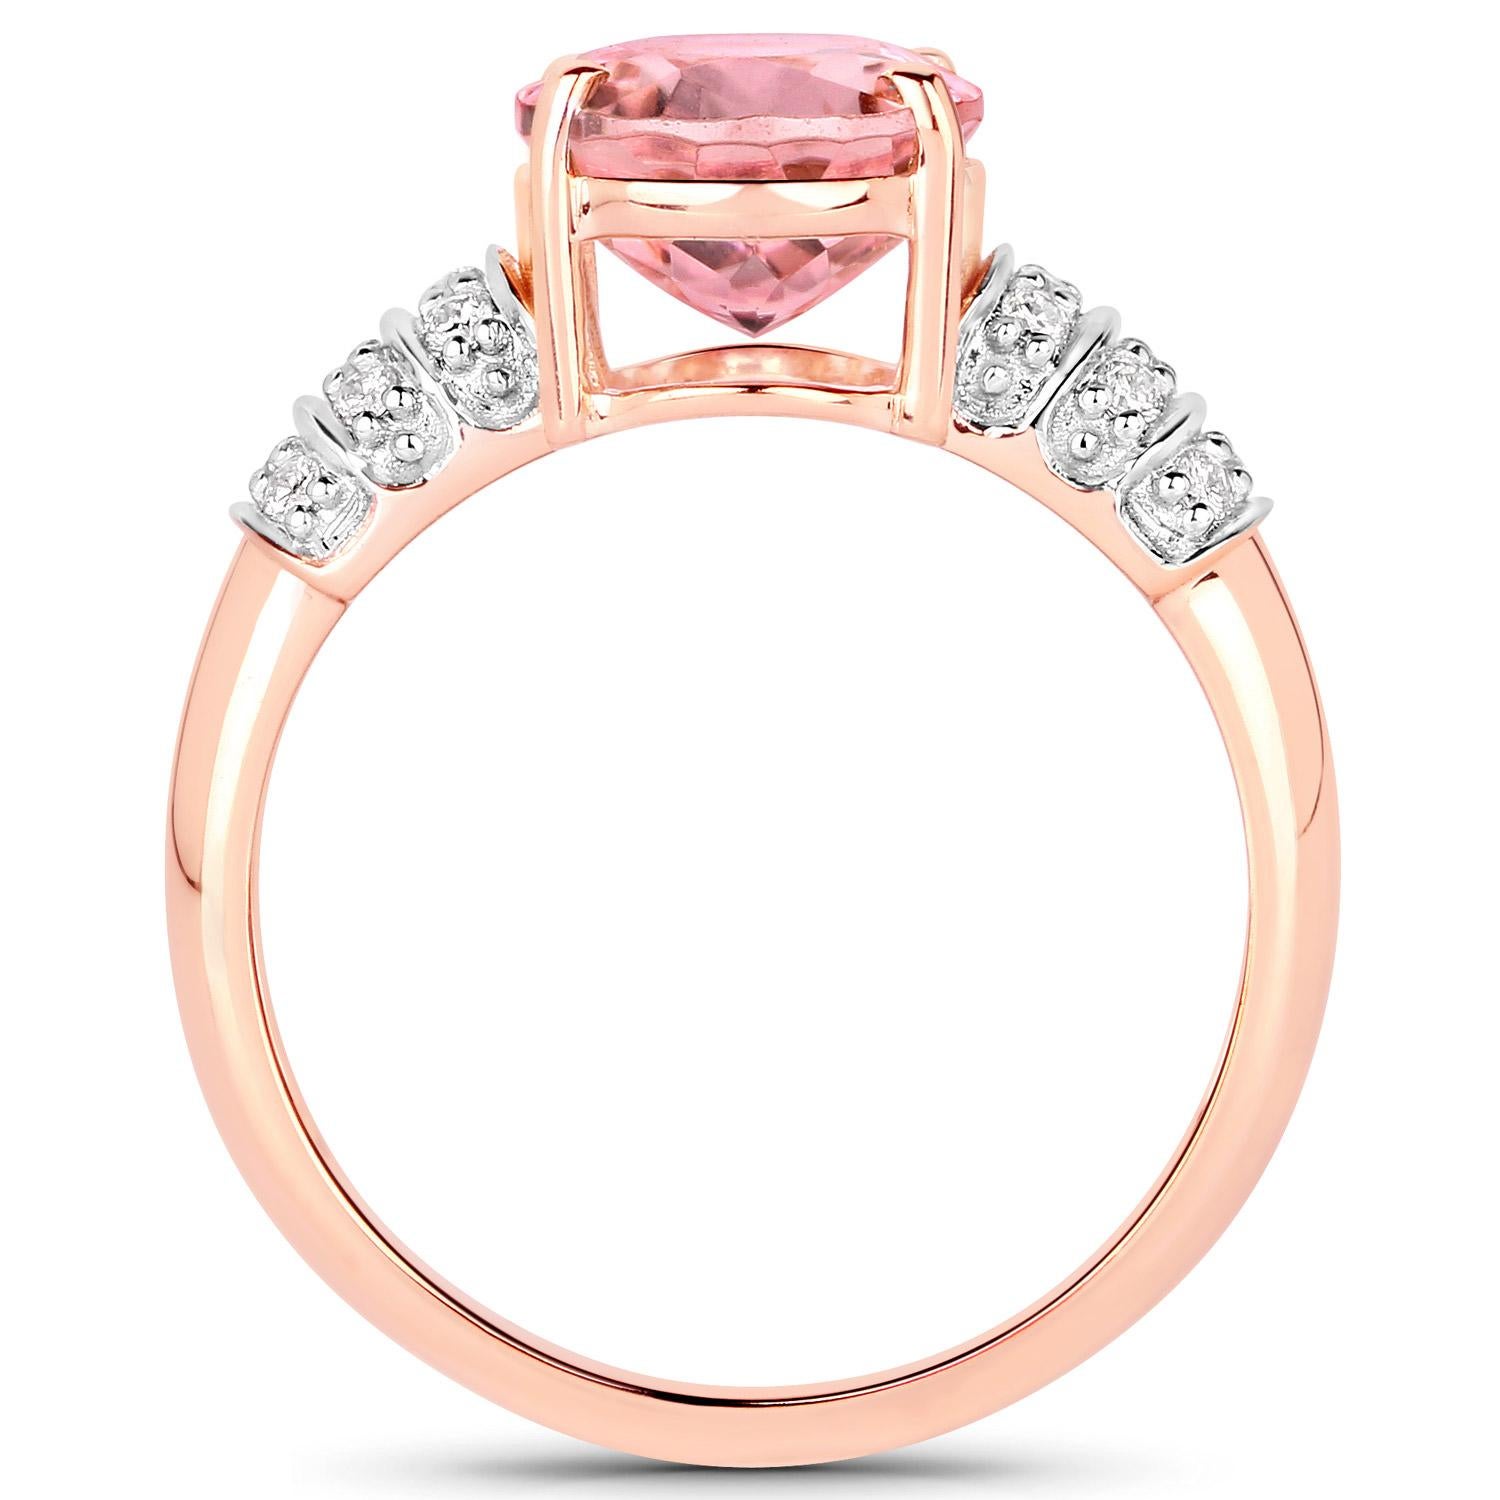 Natural Pink Tourmaline Cocktail Ring Diamond Setting 3.10 Carats 14K Rose Gold In Excellent Condition For Sale In Laguna Niguel, CA